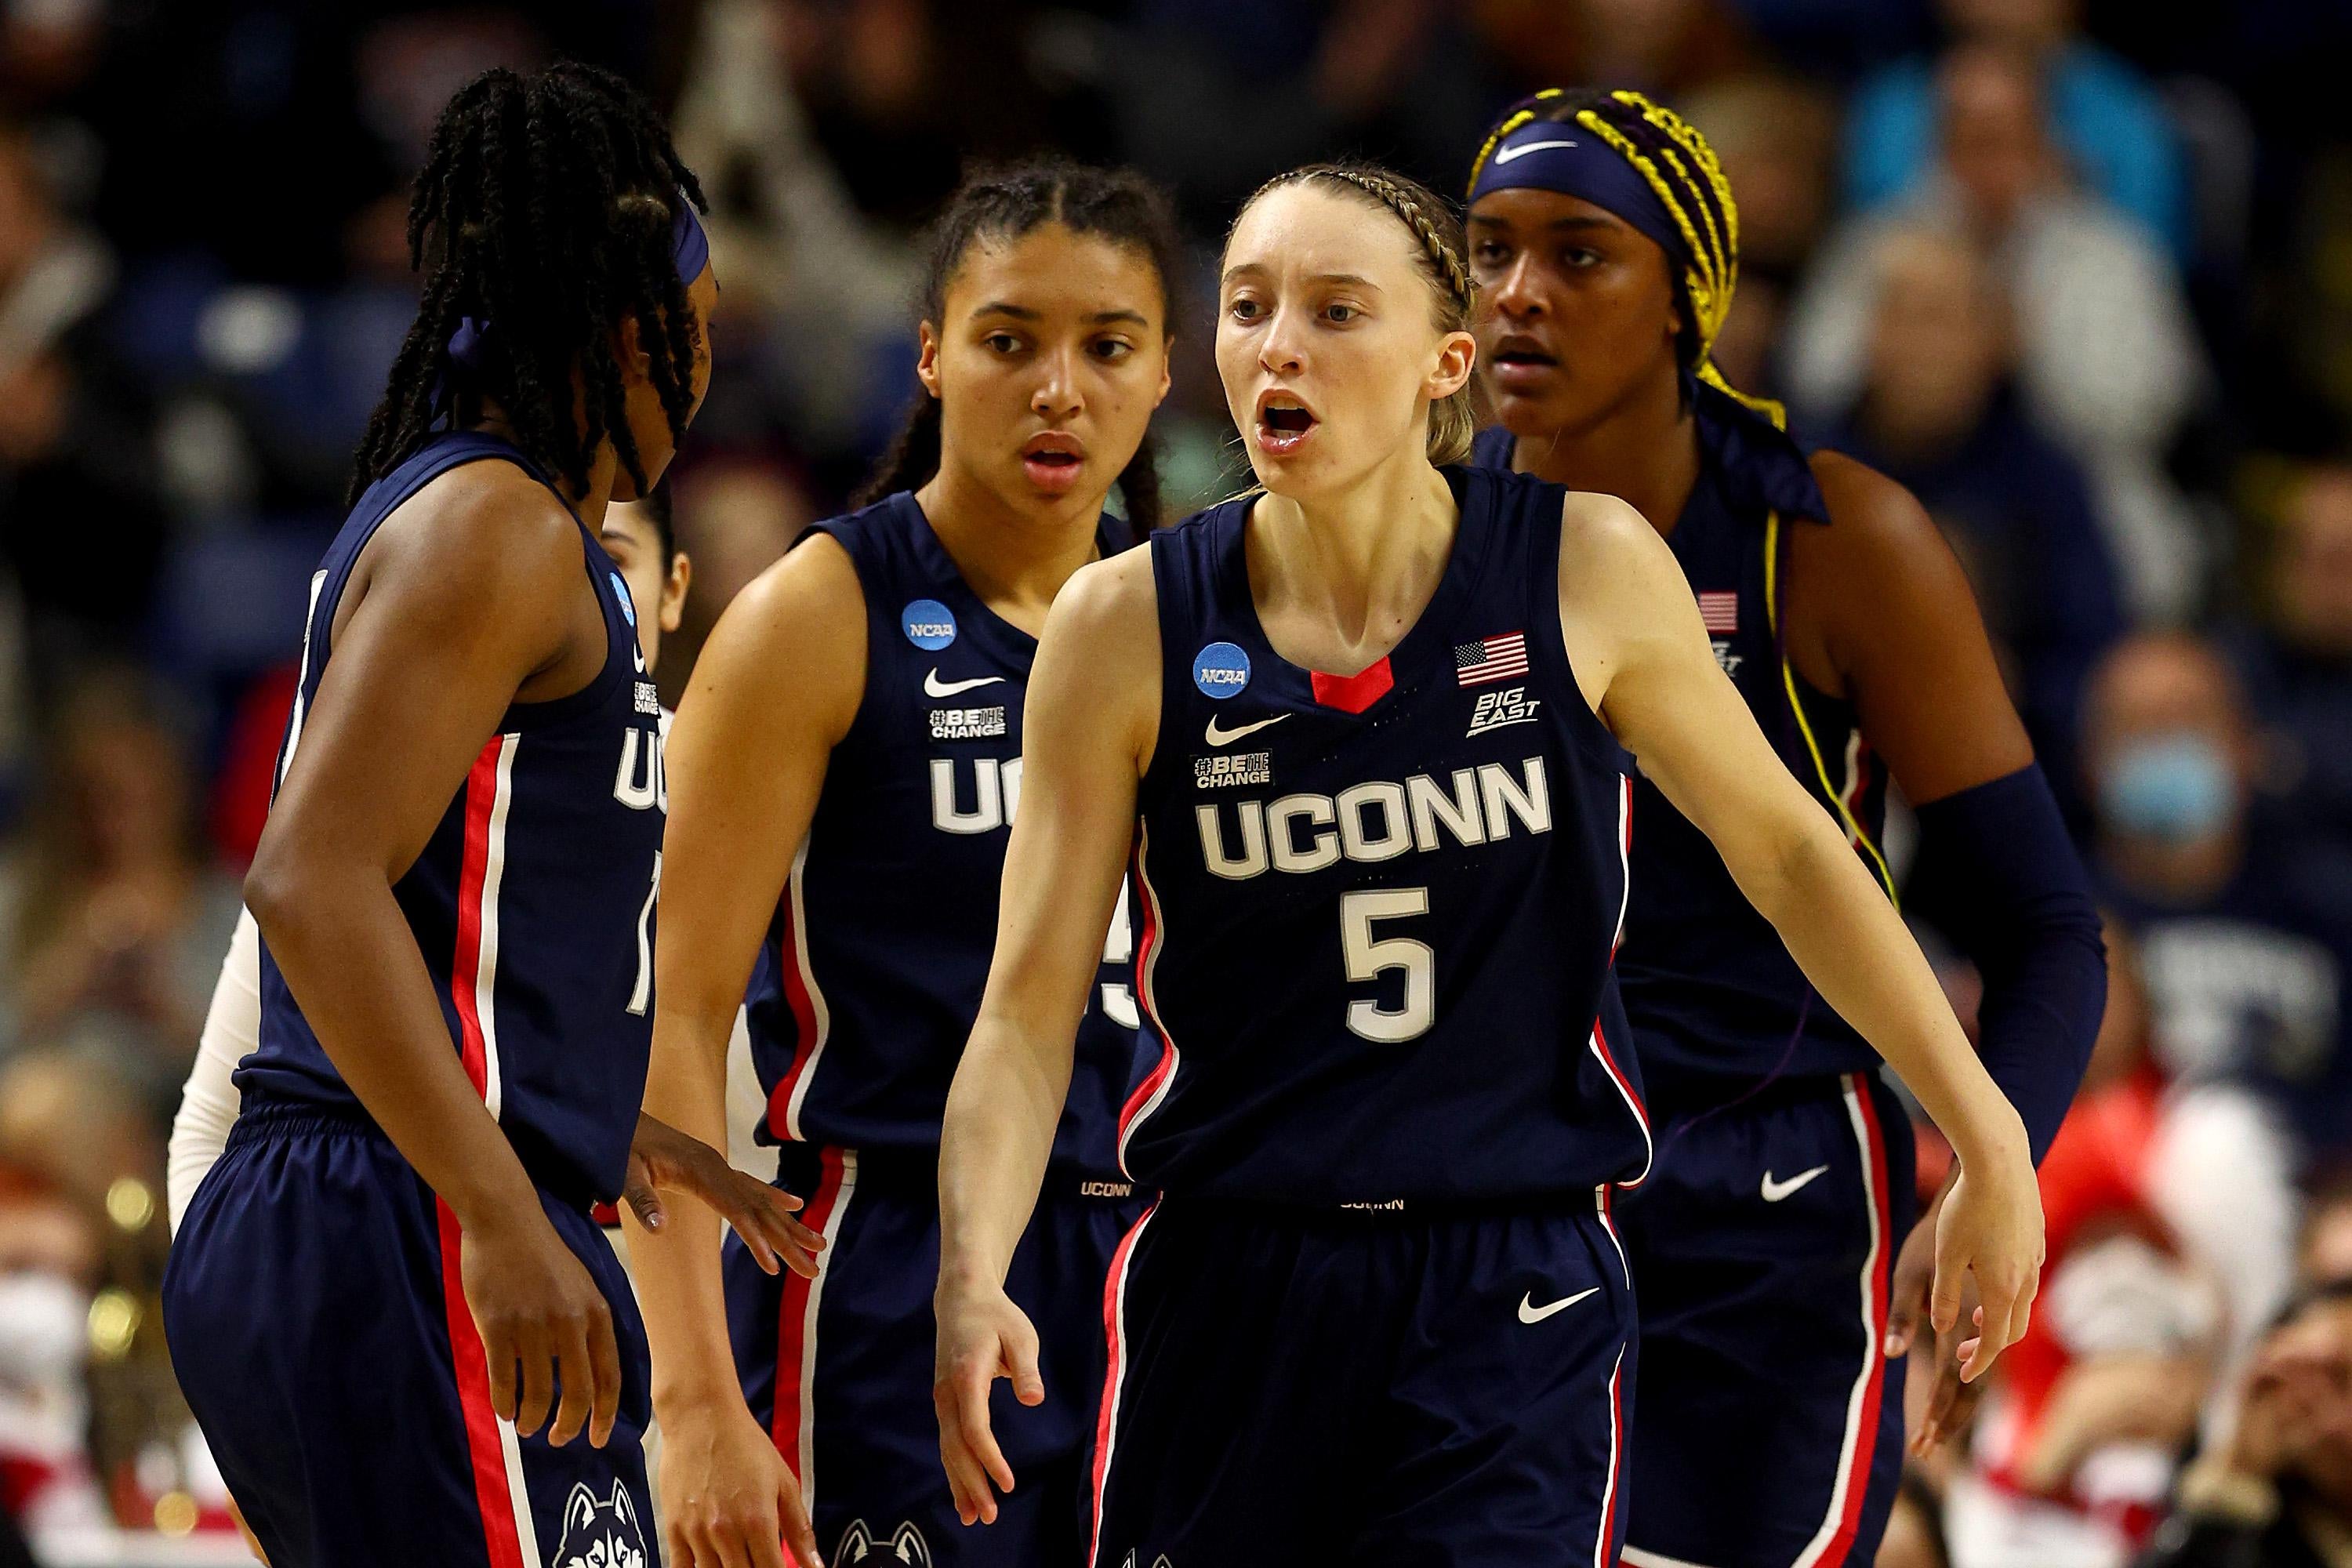 Four UConn women's basketball players standing together on the court wearing navy blue jerseys with a red and white pinstripe.